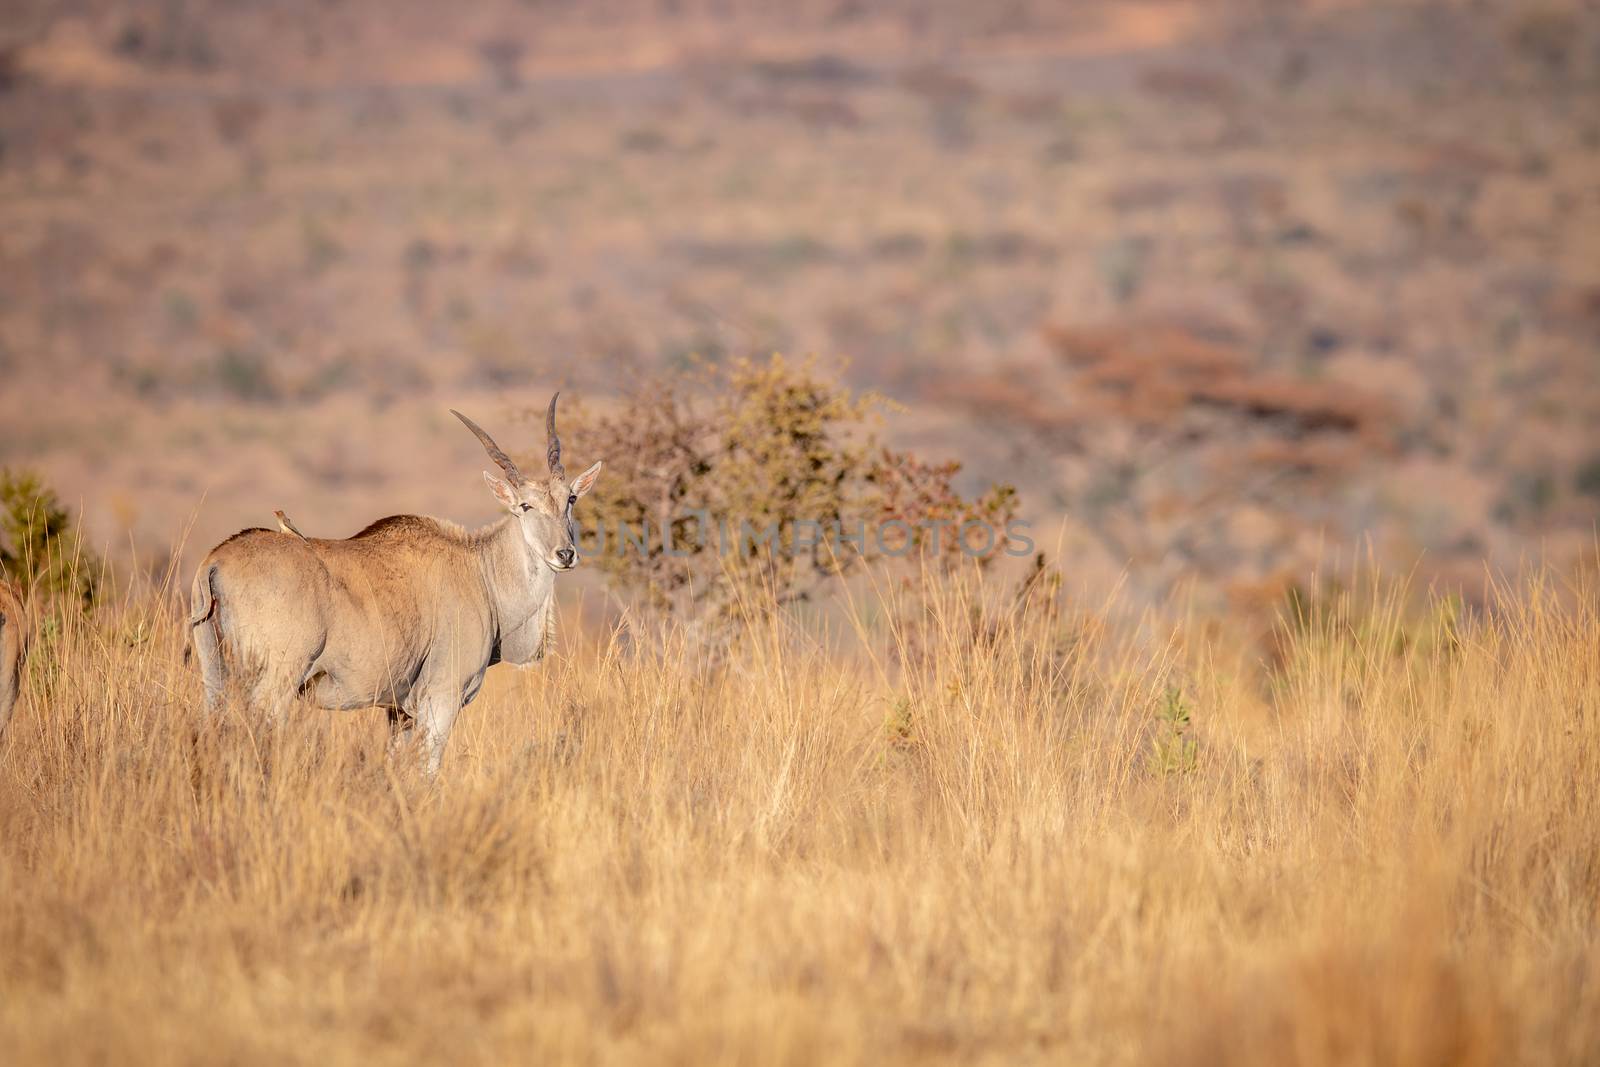 Eland standing in the high grass. by Simoneemanphotography